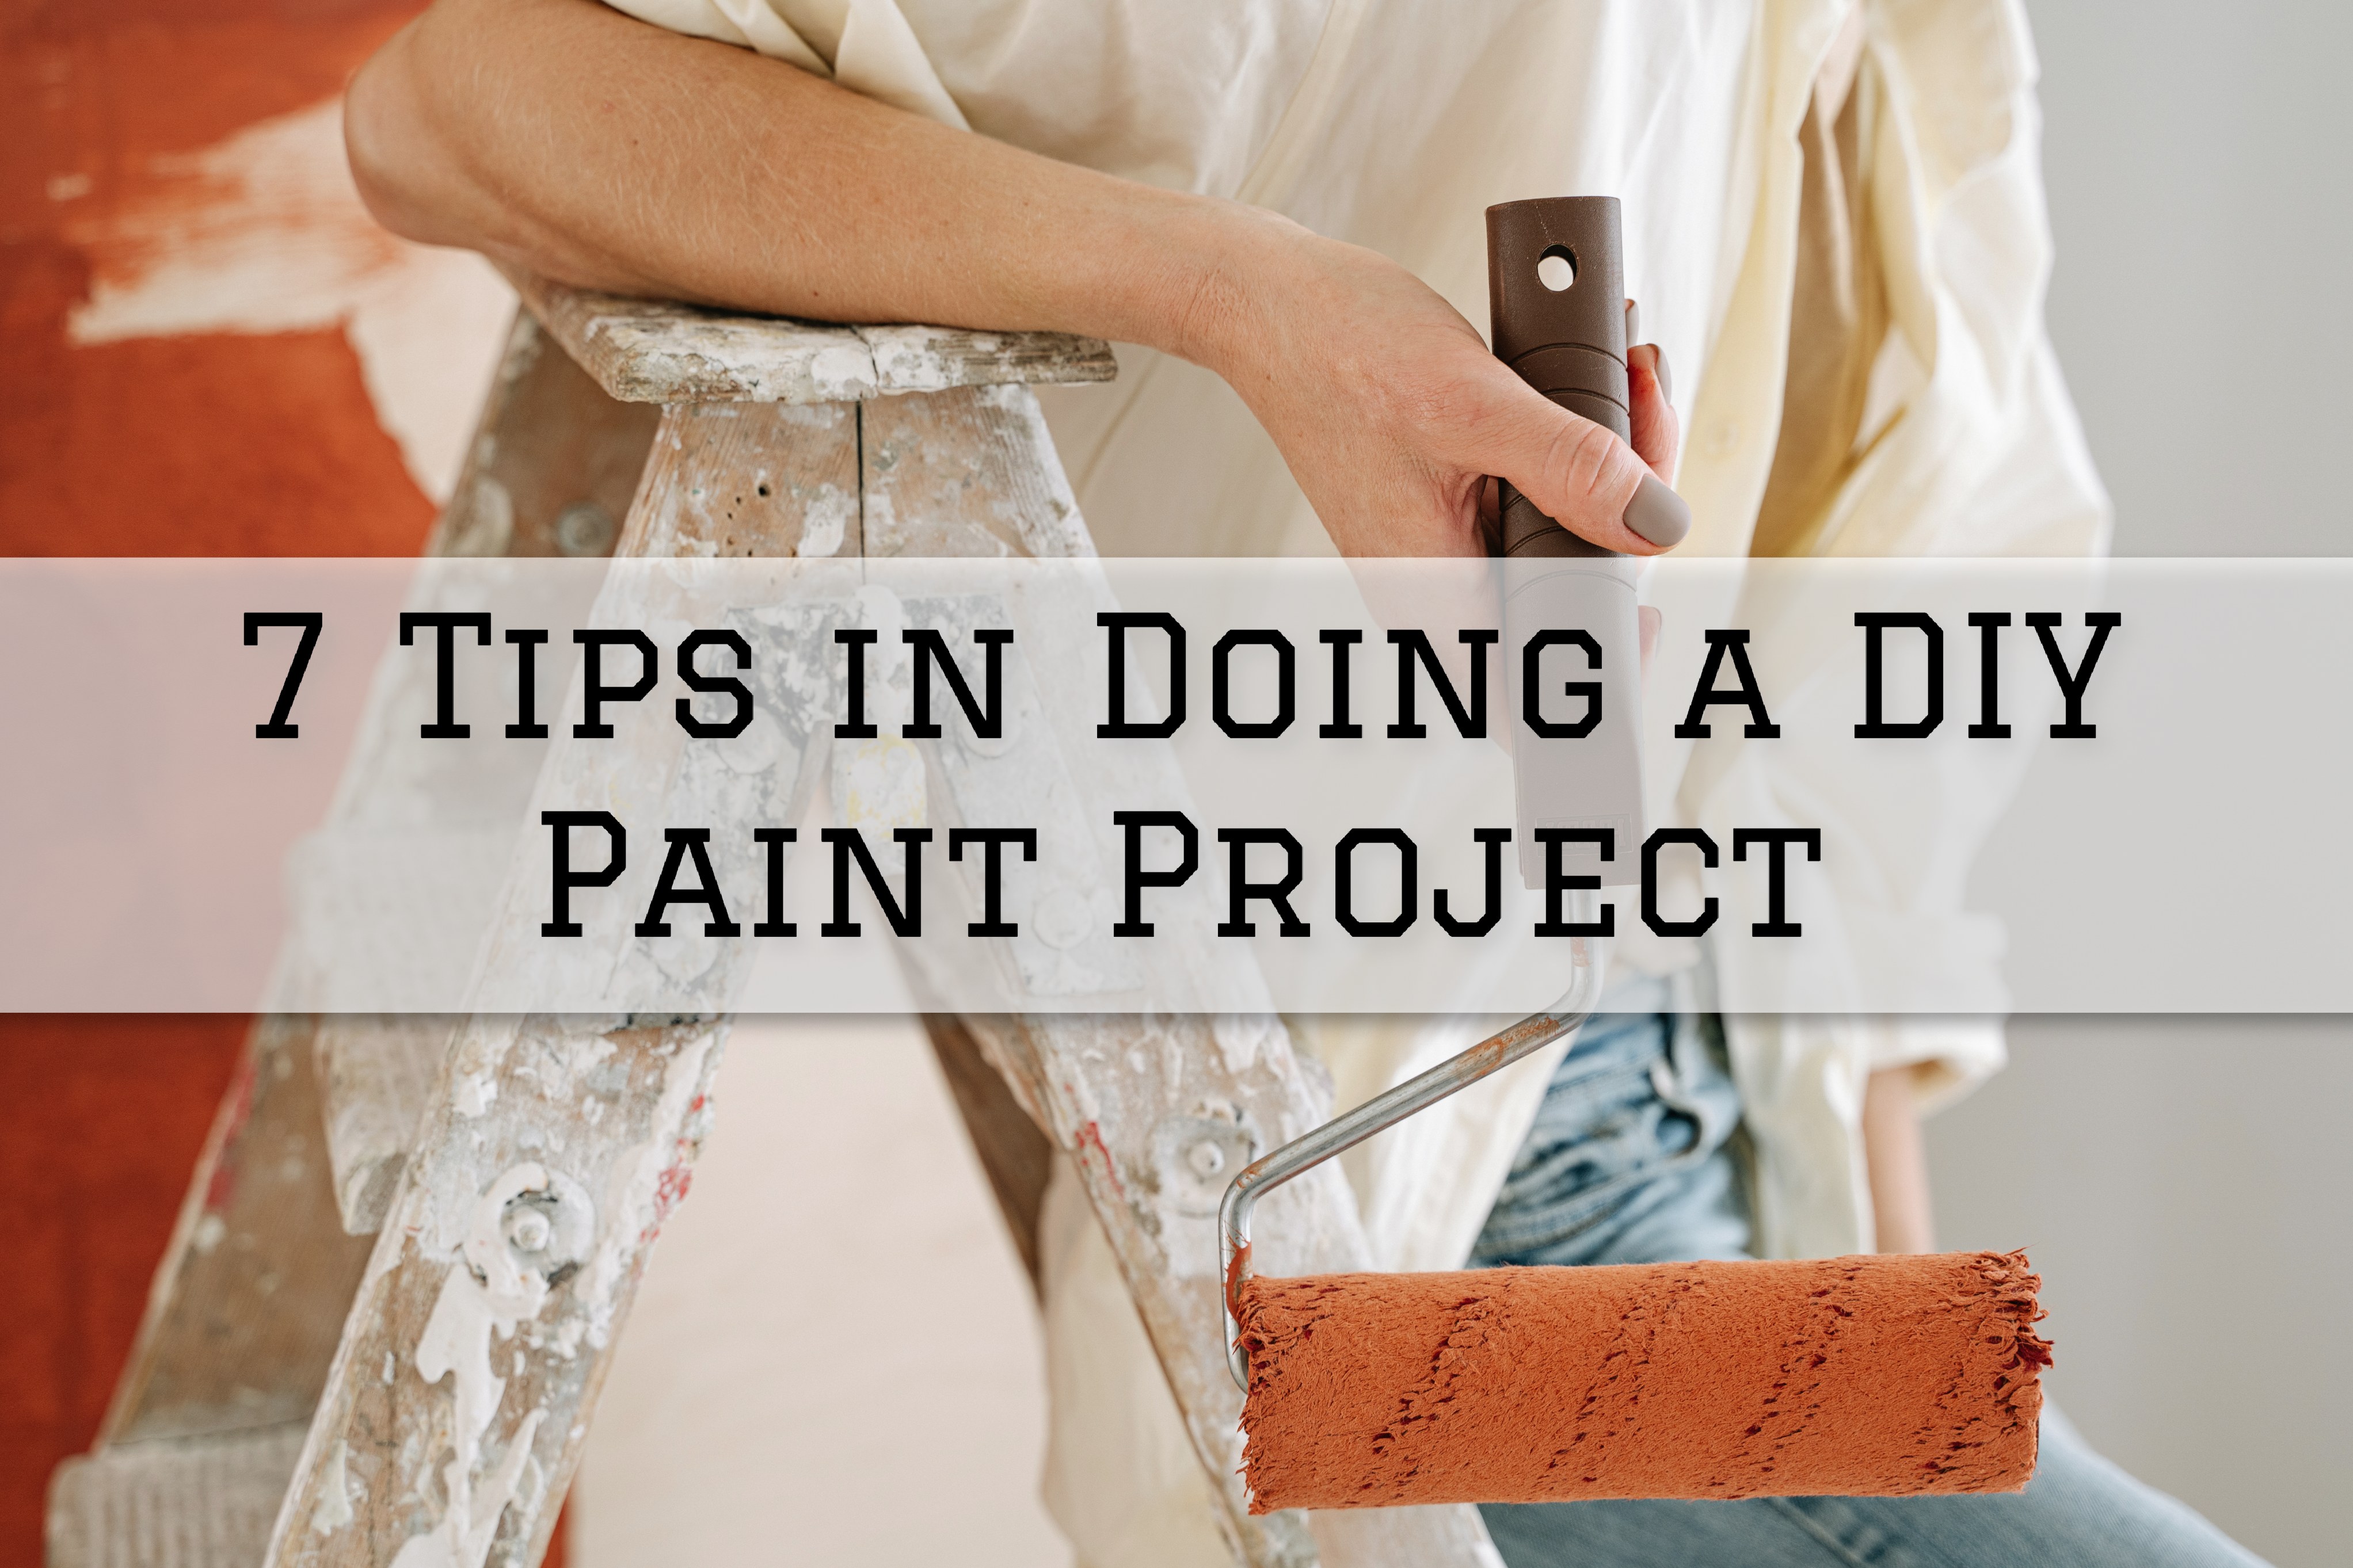 2022-01-08 The Painting and Wallcovering Co Mt. Laurel NJ Tips in Doing a DIY Paint Project